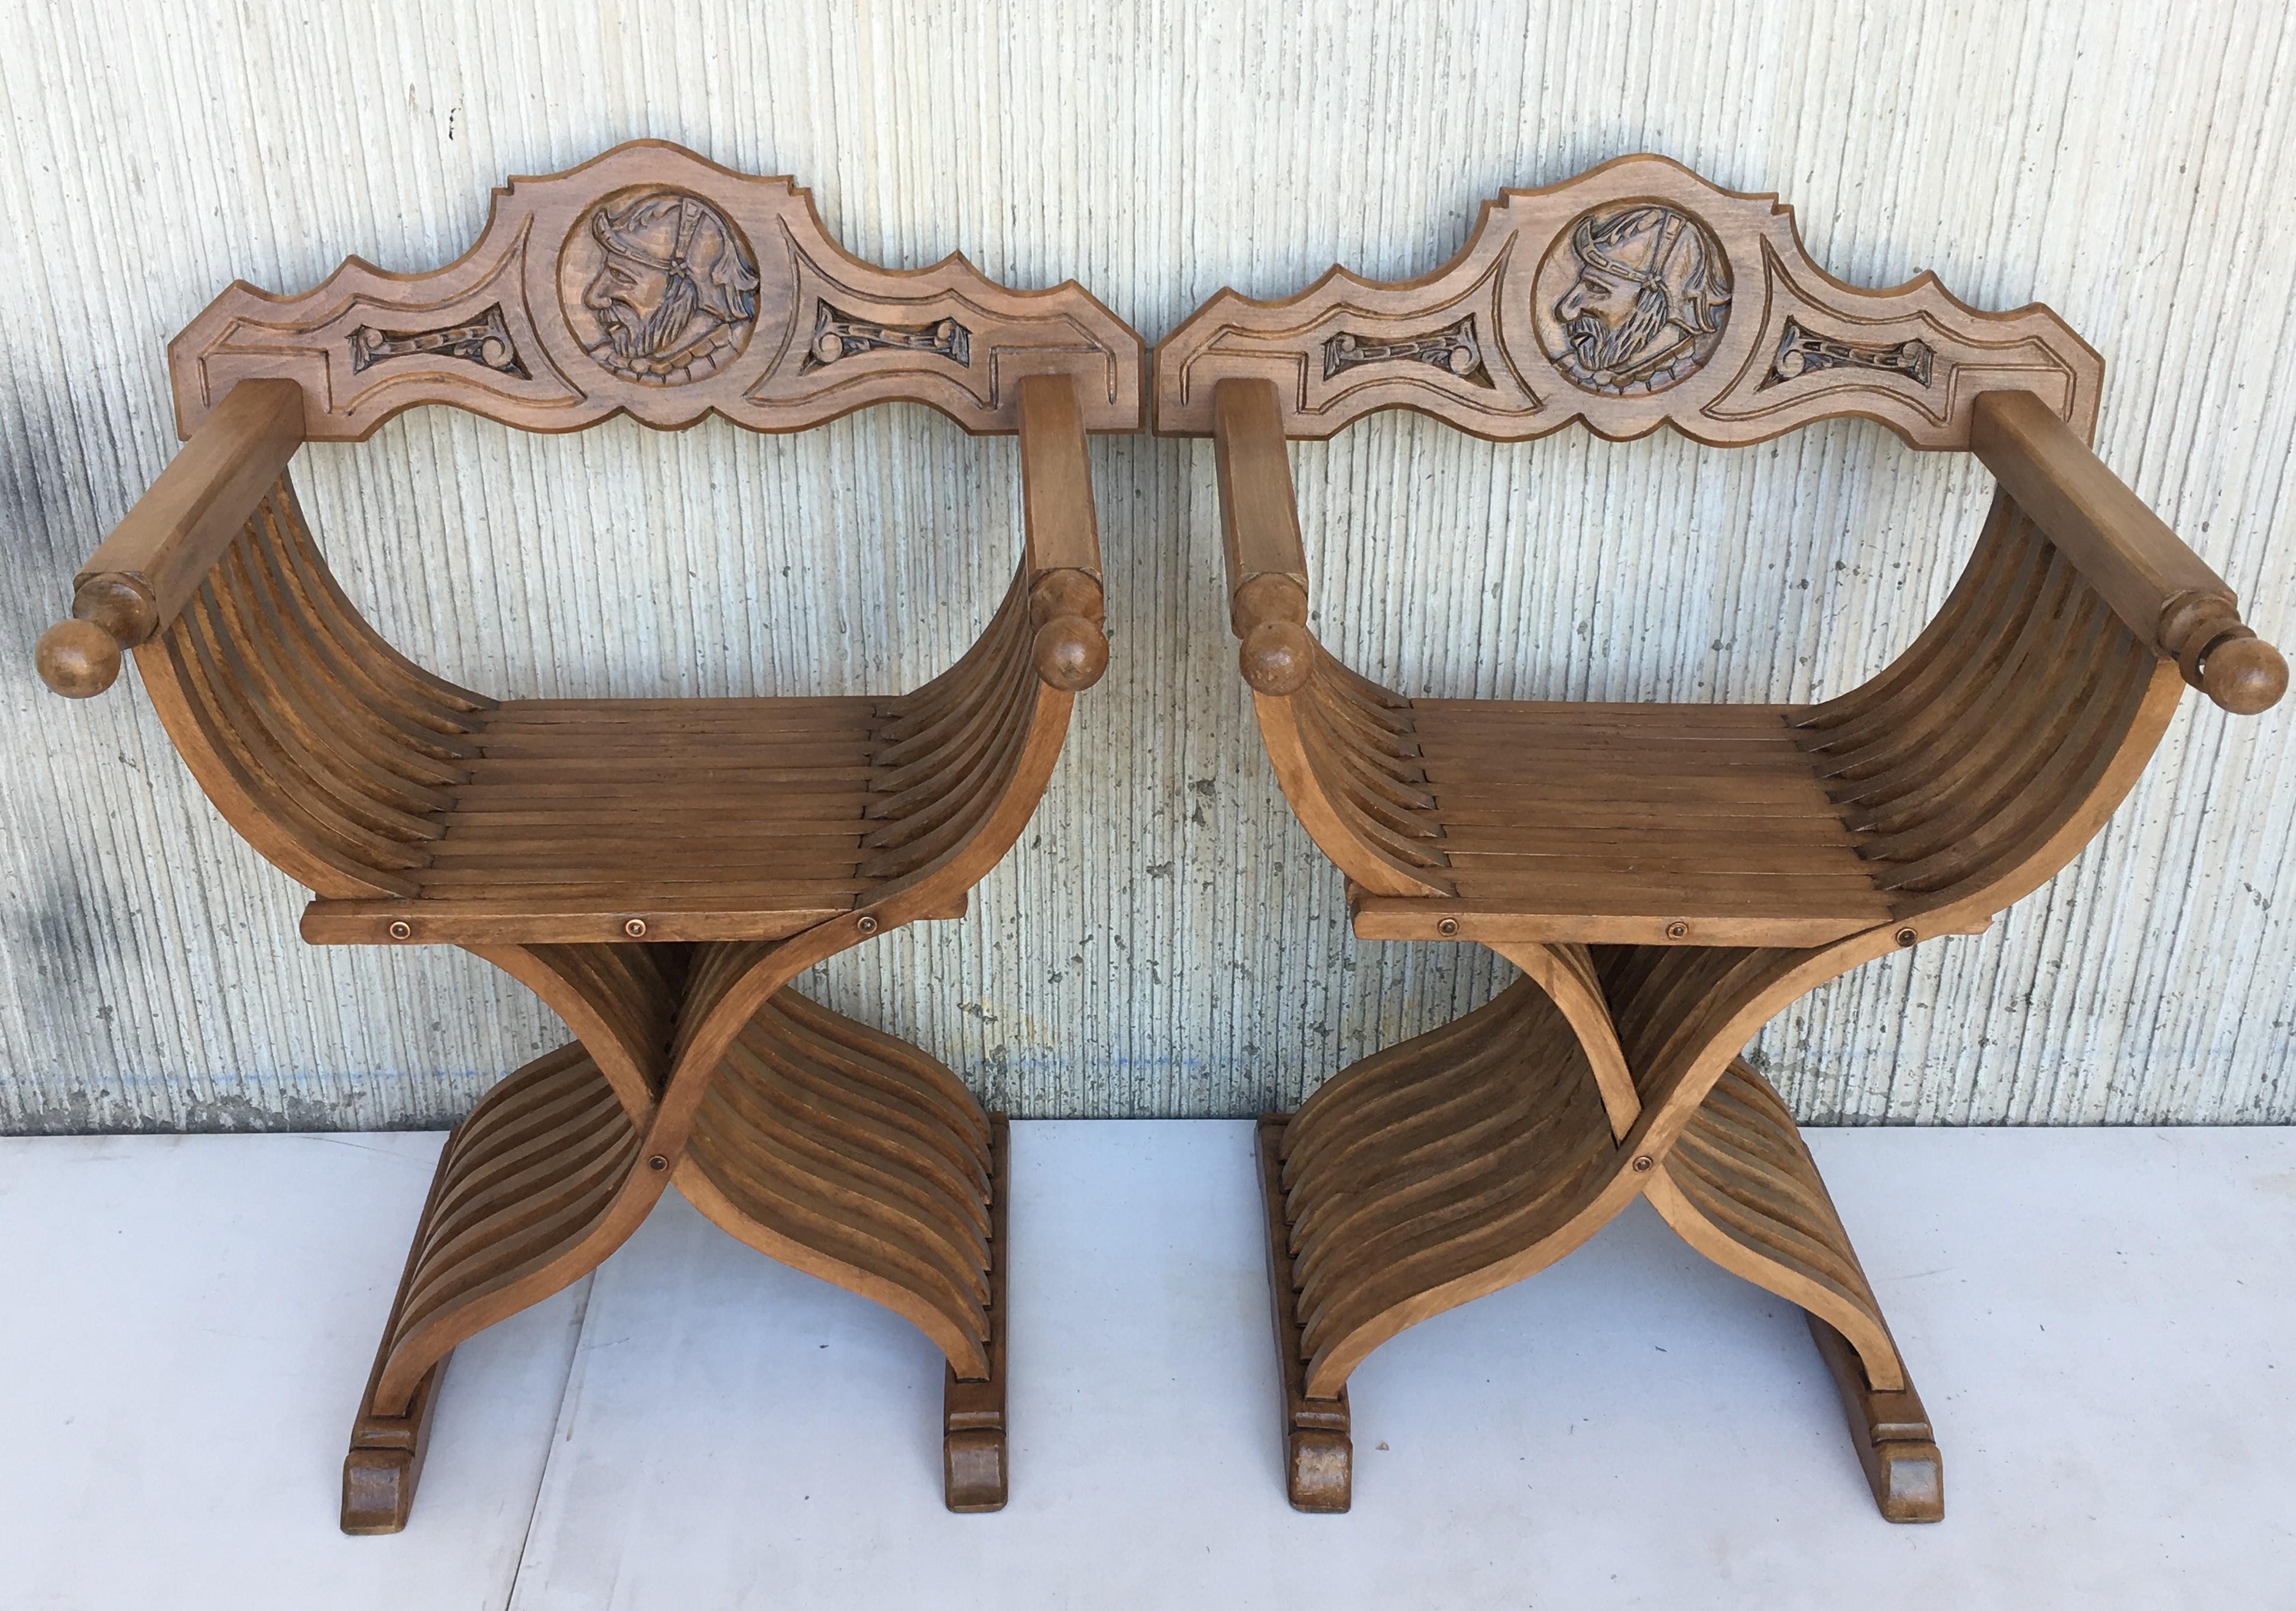 19th century carved walnut folding scissors Savonarola bench/settee

Typical of the Italian Renaissance with carved Florentine backs.
This pair created in the 19th century, most likely 1840s-1850s, are in perfect condition. The Savonarola chair